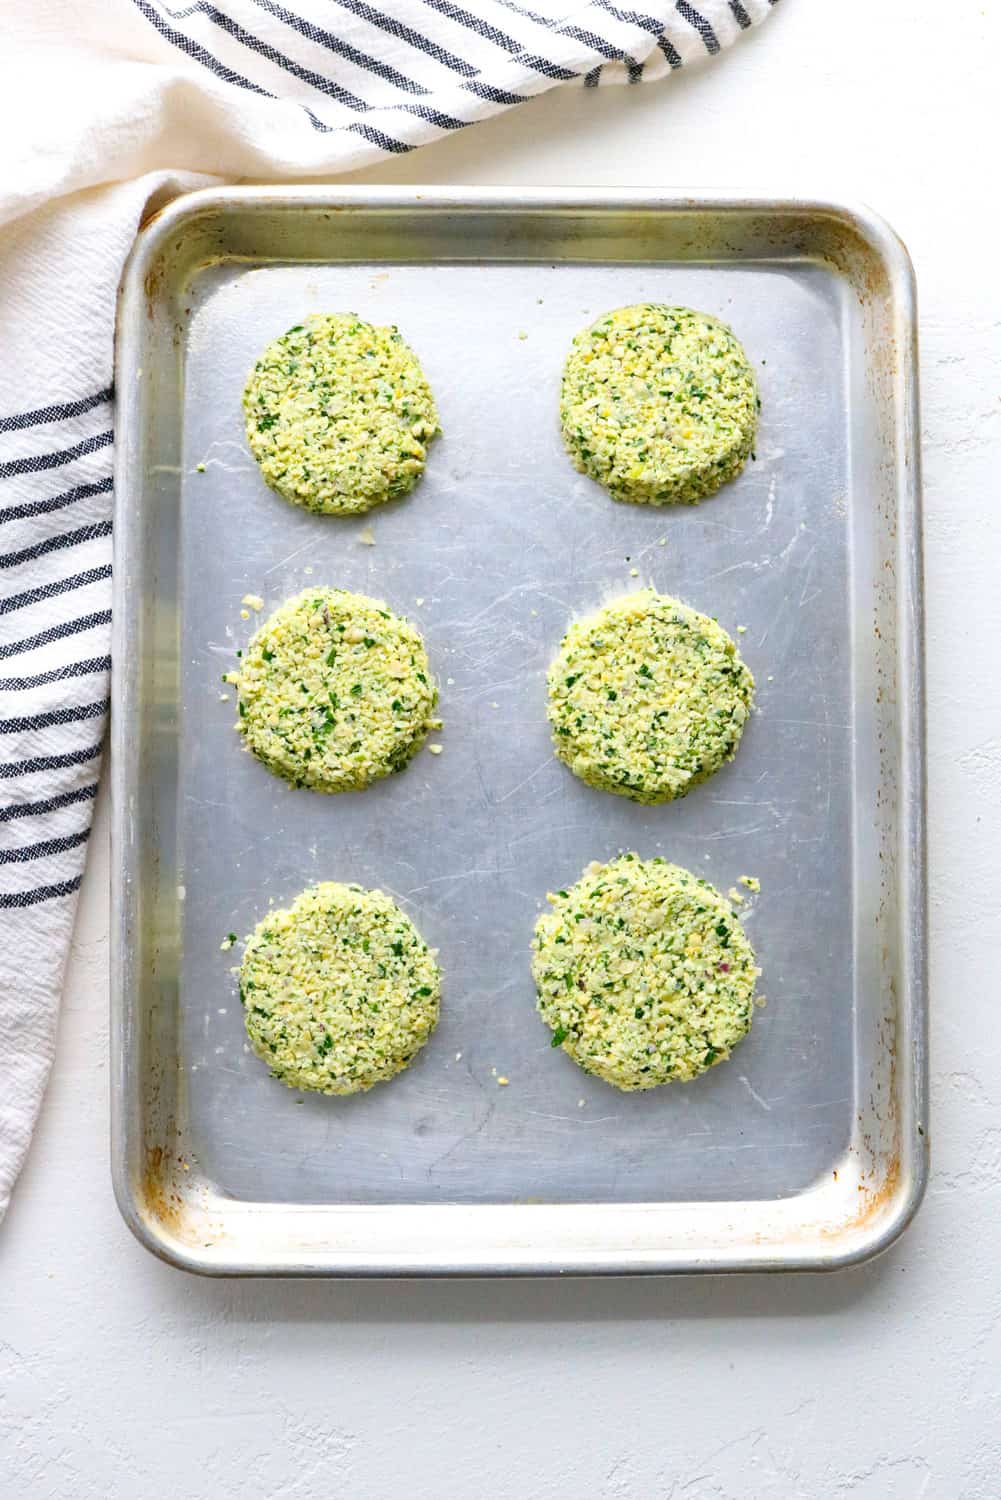 formed falafel patties on a baking sheet with a striped linen next to it